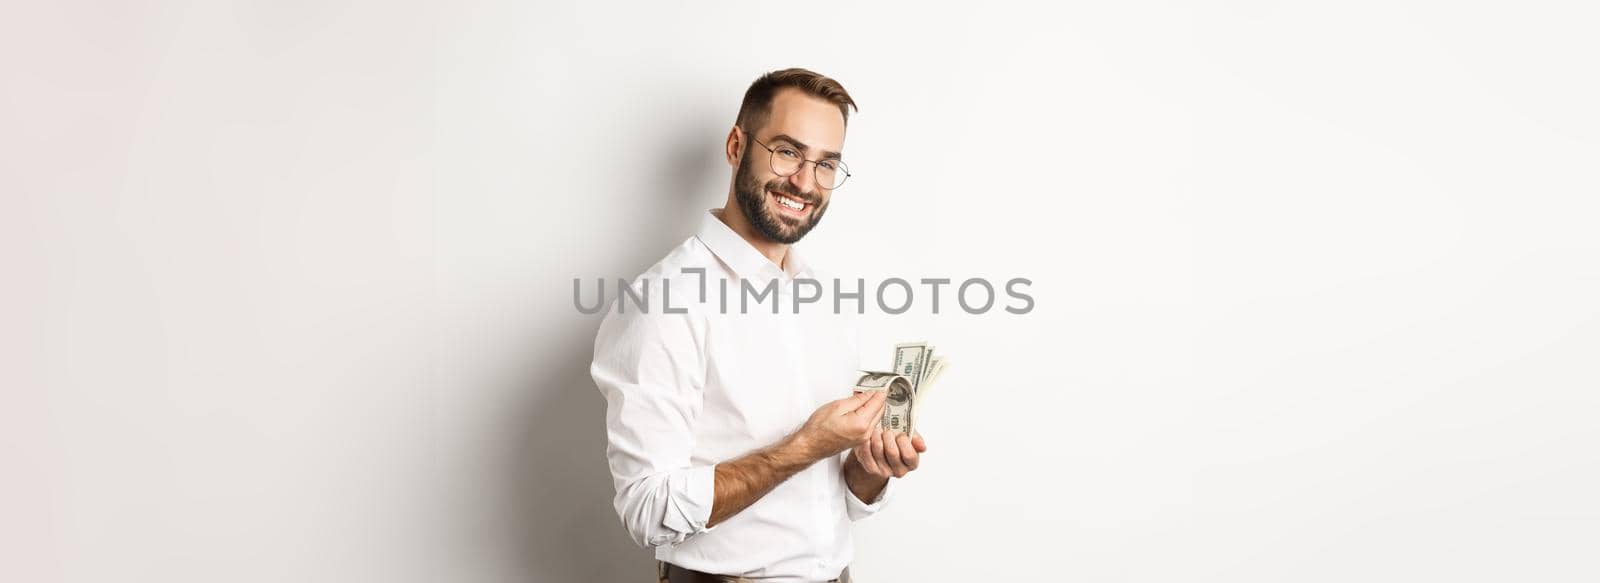 Successful business man counting money and smiling, standing against white background and looking satisfied.